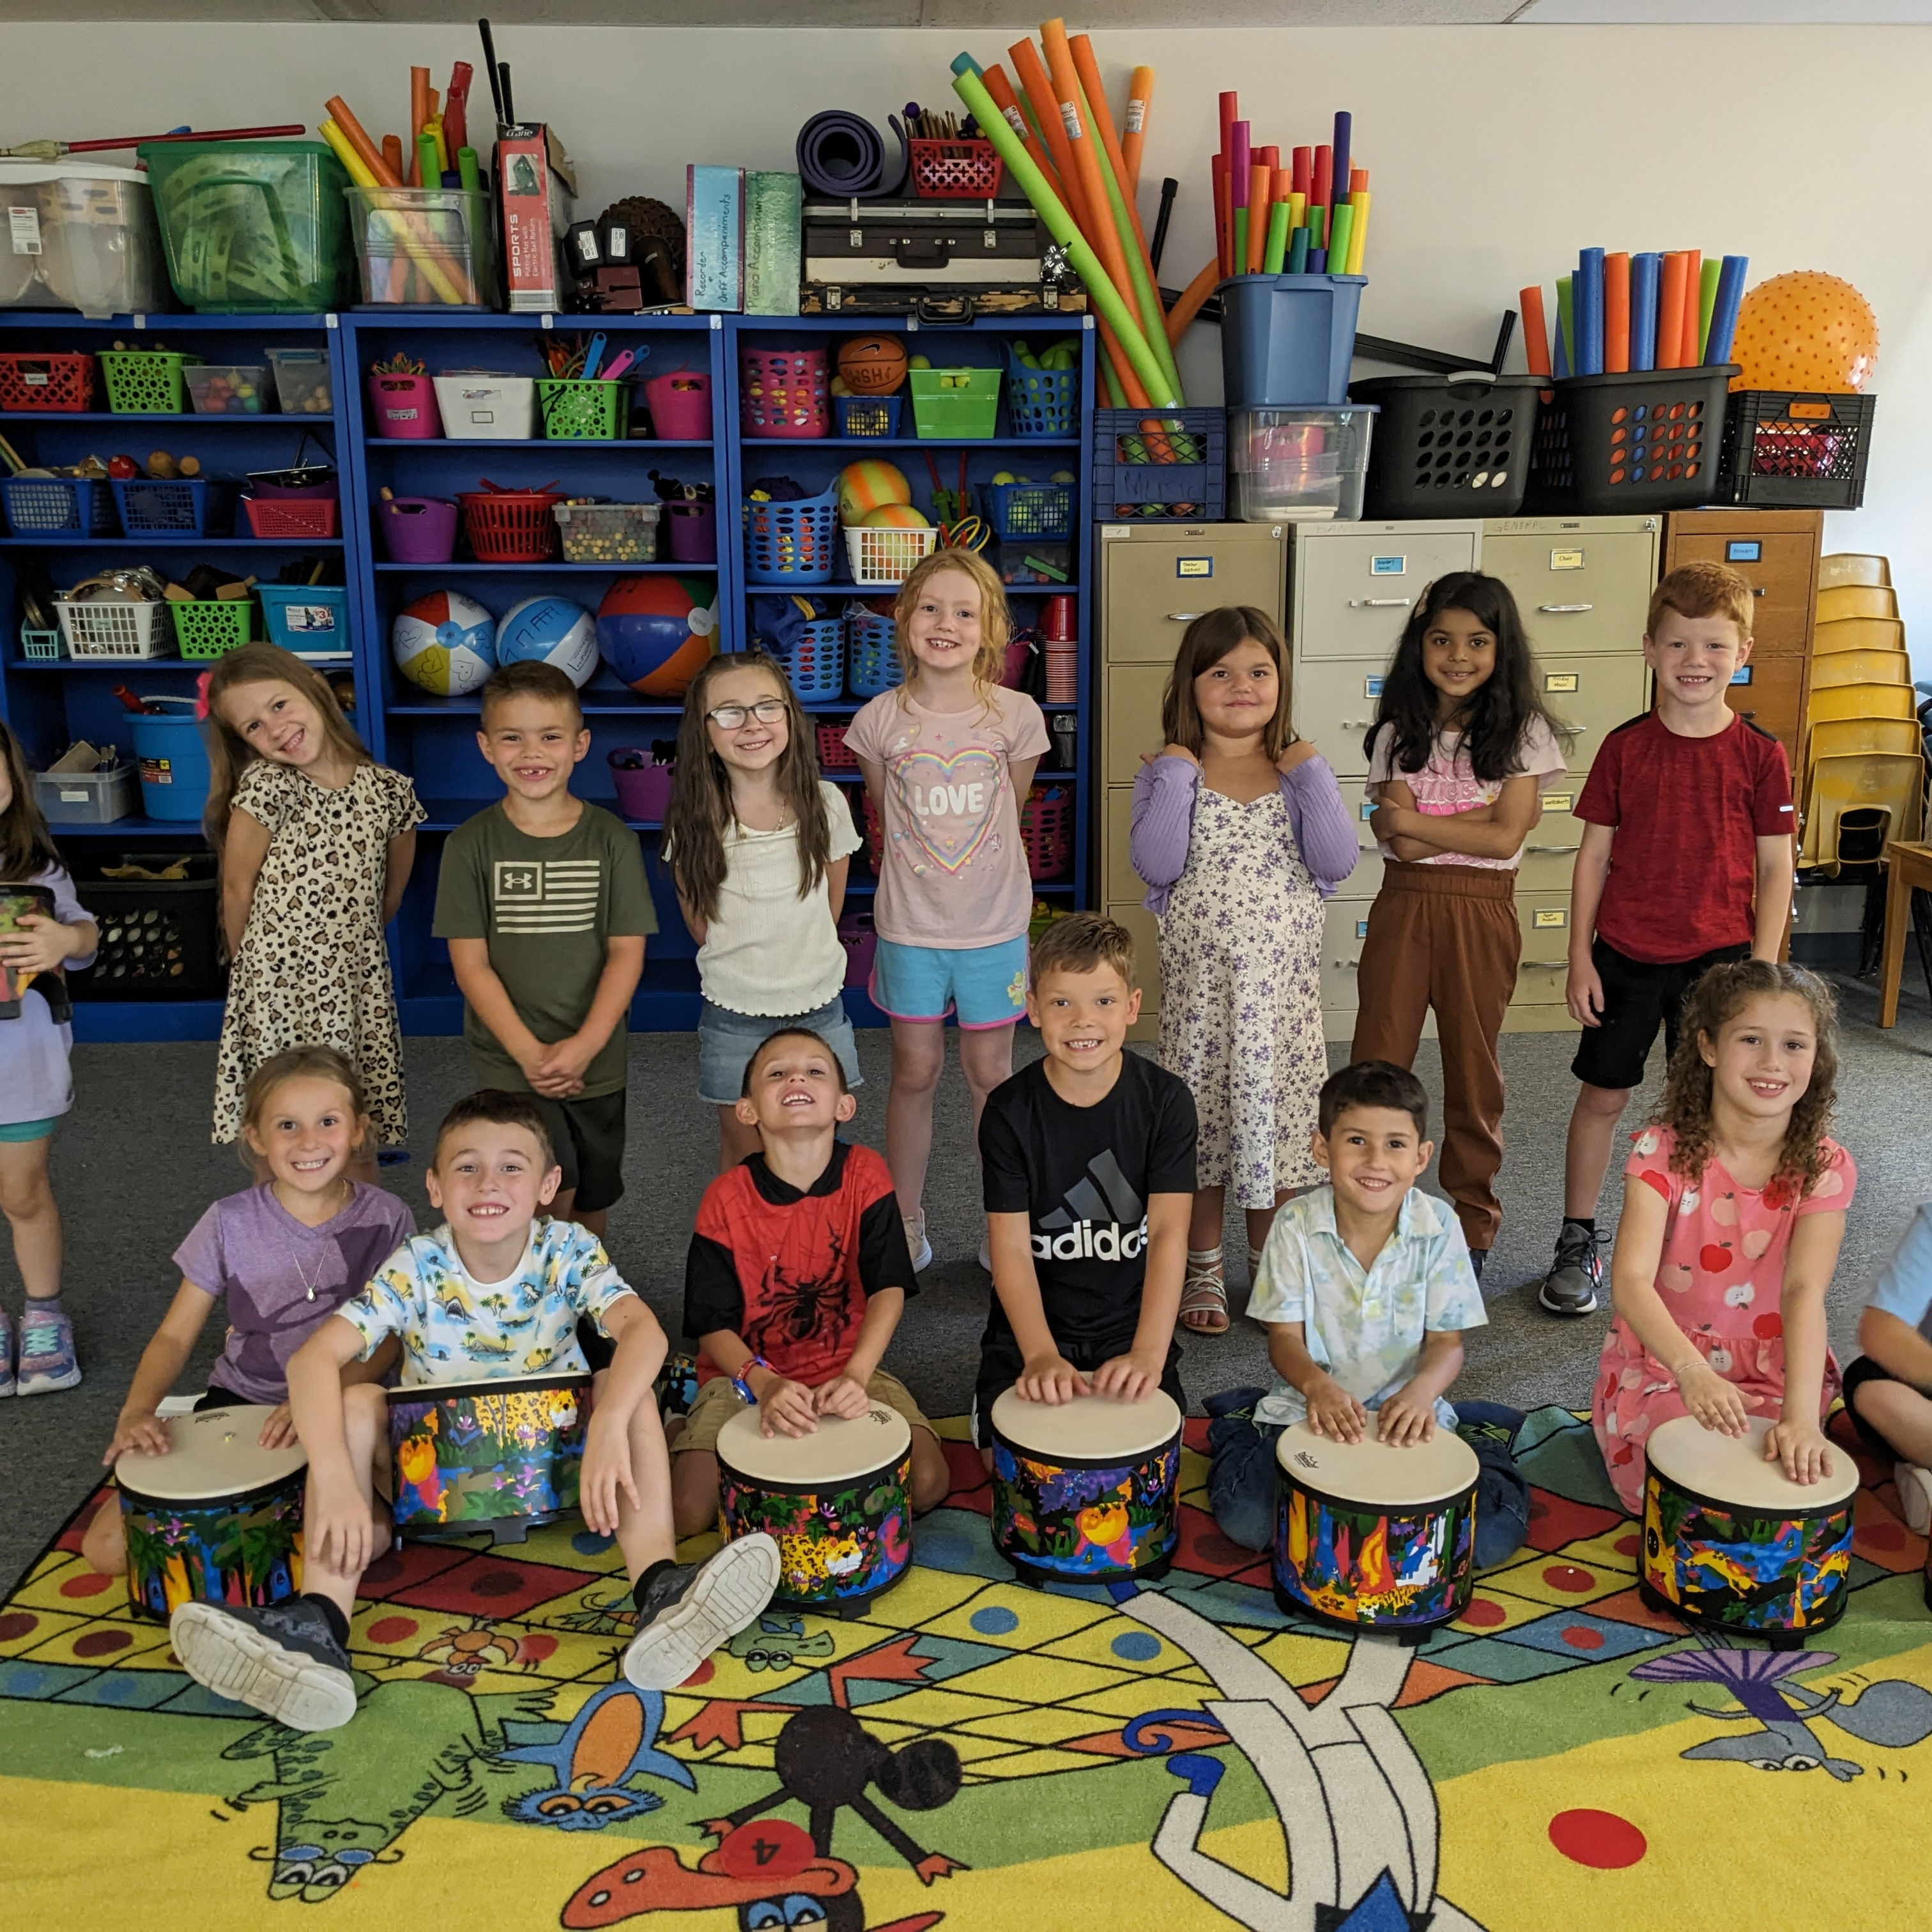 Mrs. Mujanovic was awarded a grant and was able to purchase new drums for her music classroom. 